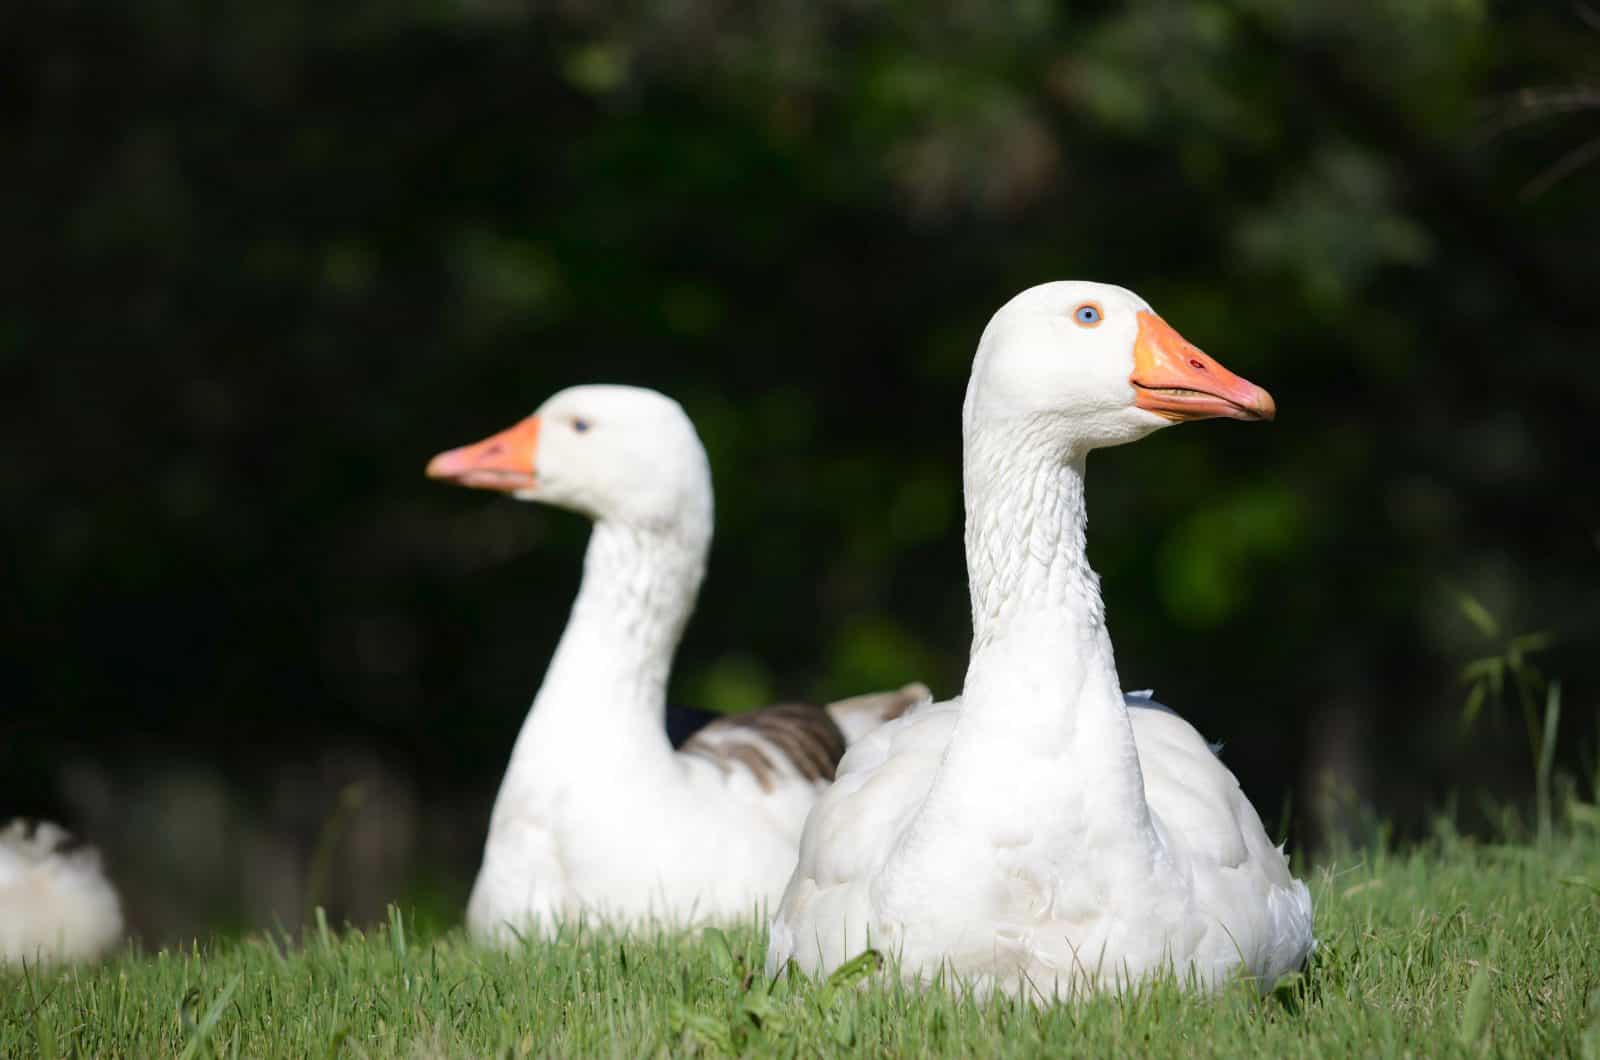 The property's beautiful geese